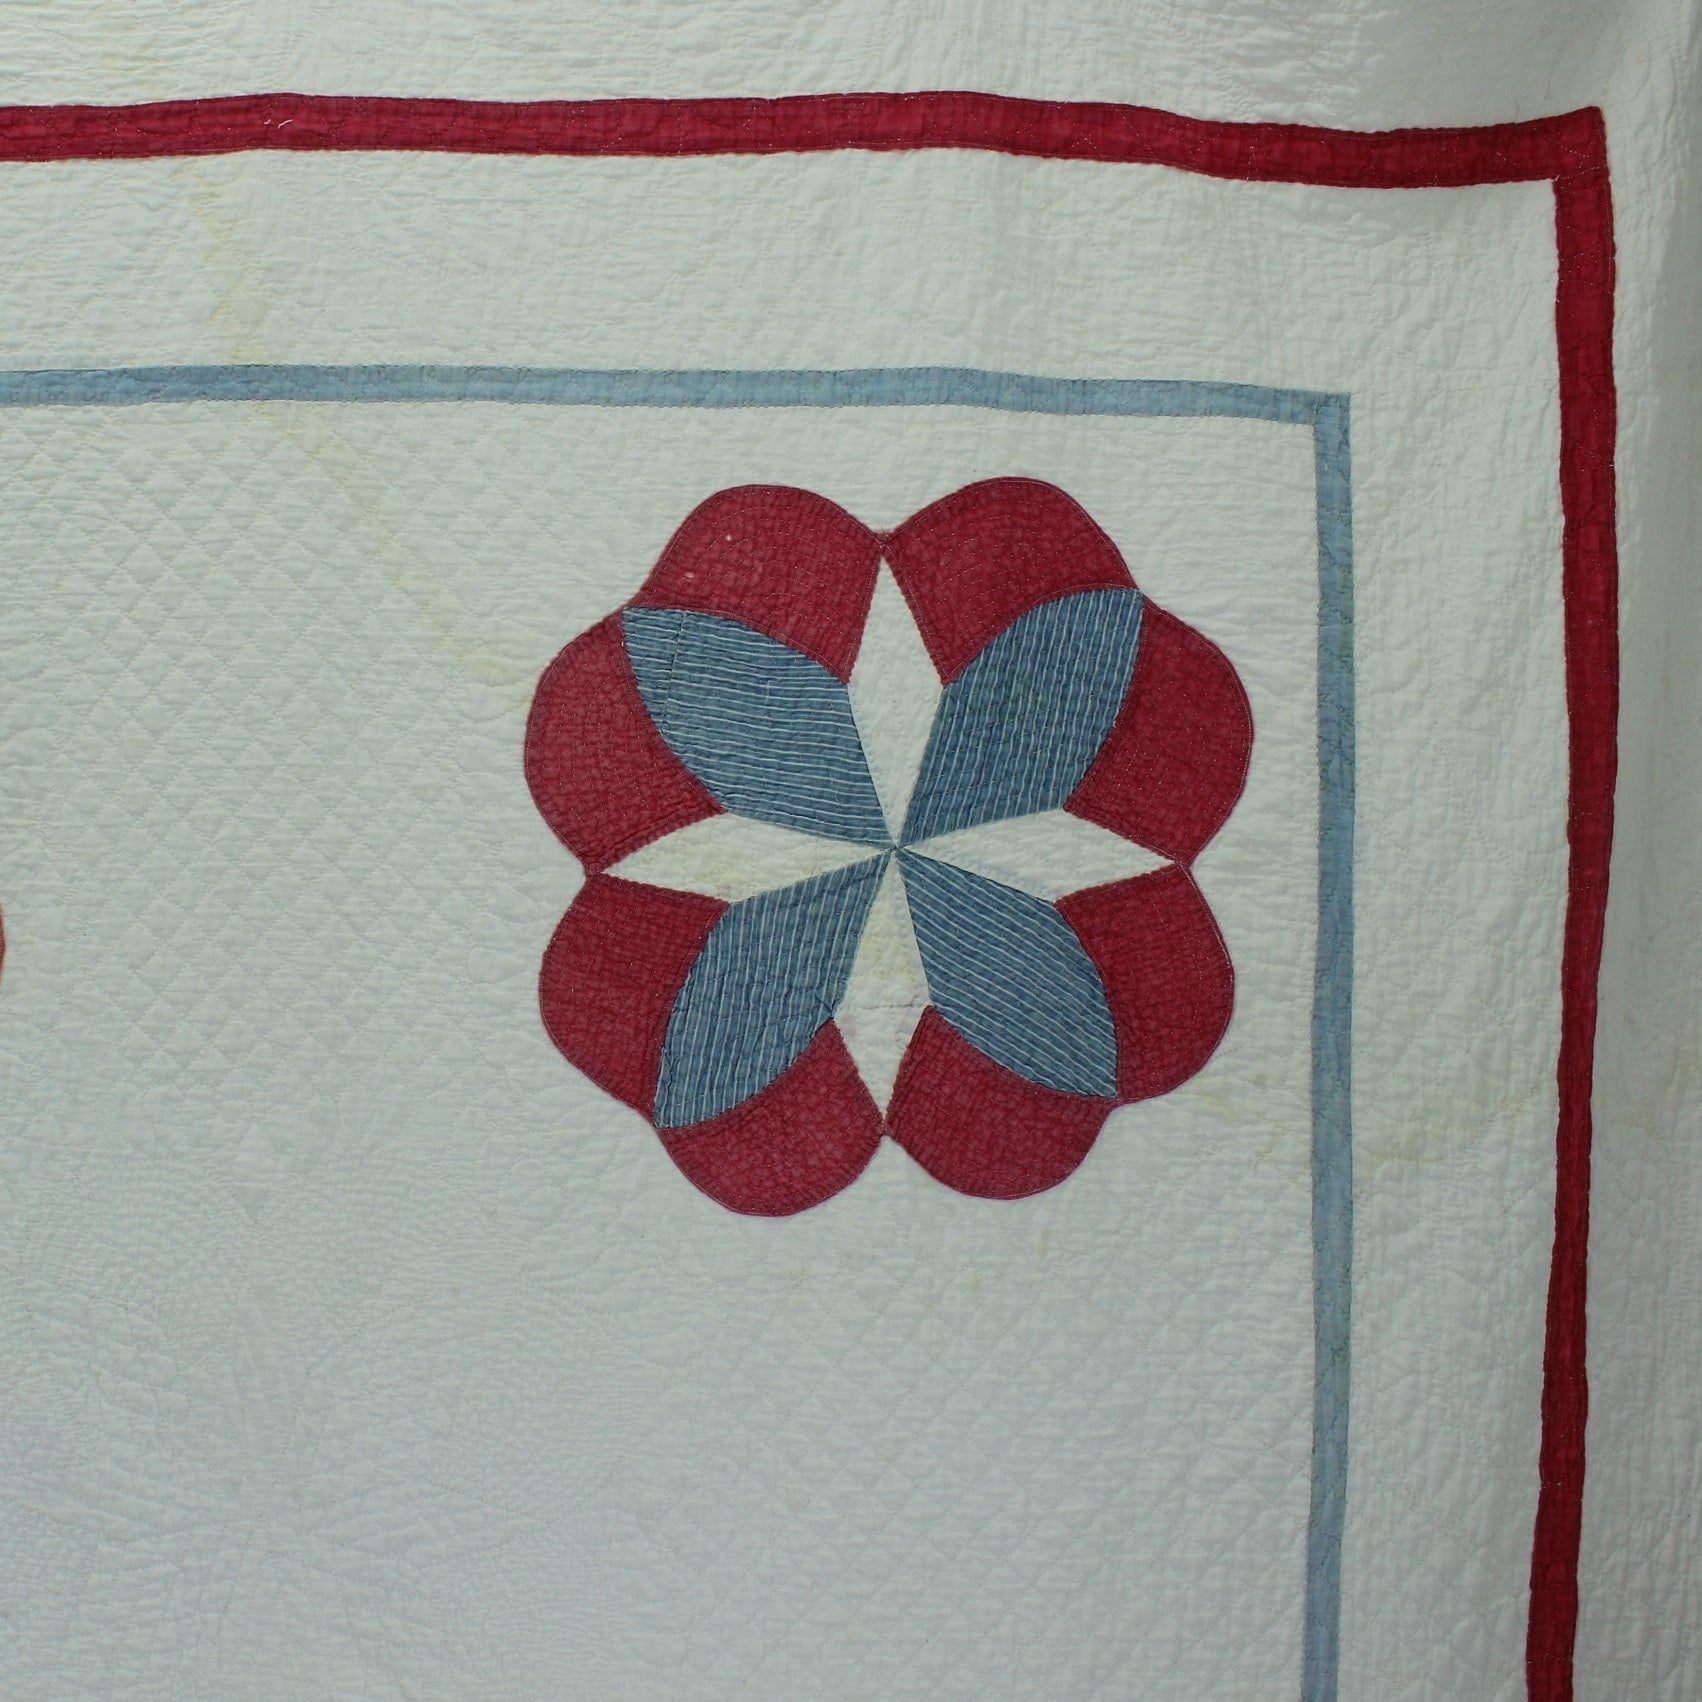 Antique Intricate Hand Stitched Quilt - Early 1900s Cotton Red Blue 9 Design - Natural Cotton Fill simplistic design